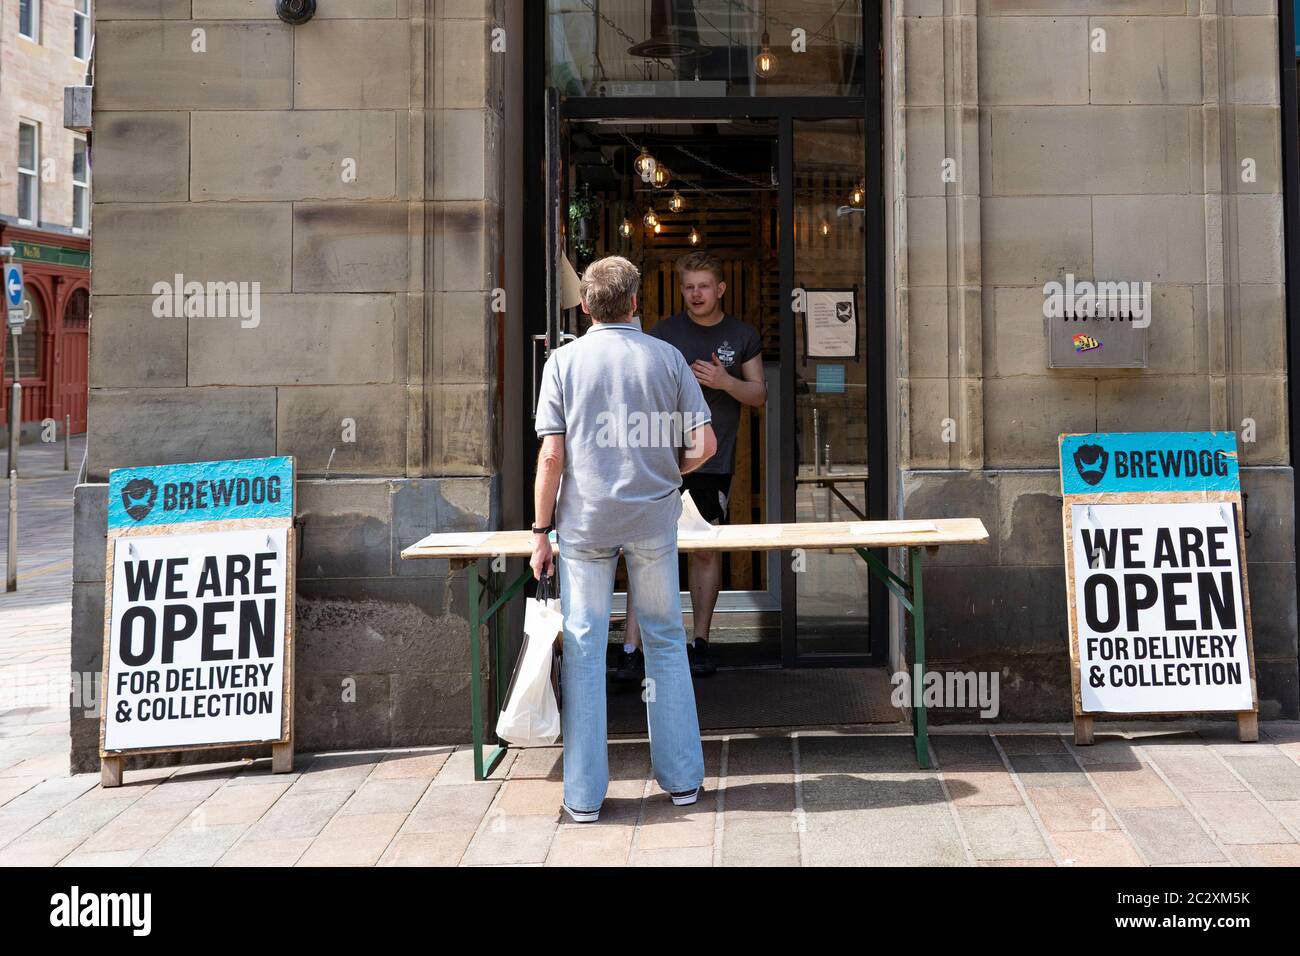 Brewdog pub in Glasgow city centre selling beer at the front door for customers to takeaway, Scotland, UK Stock Photo